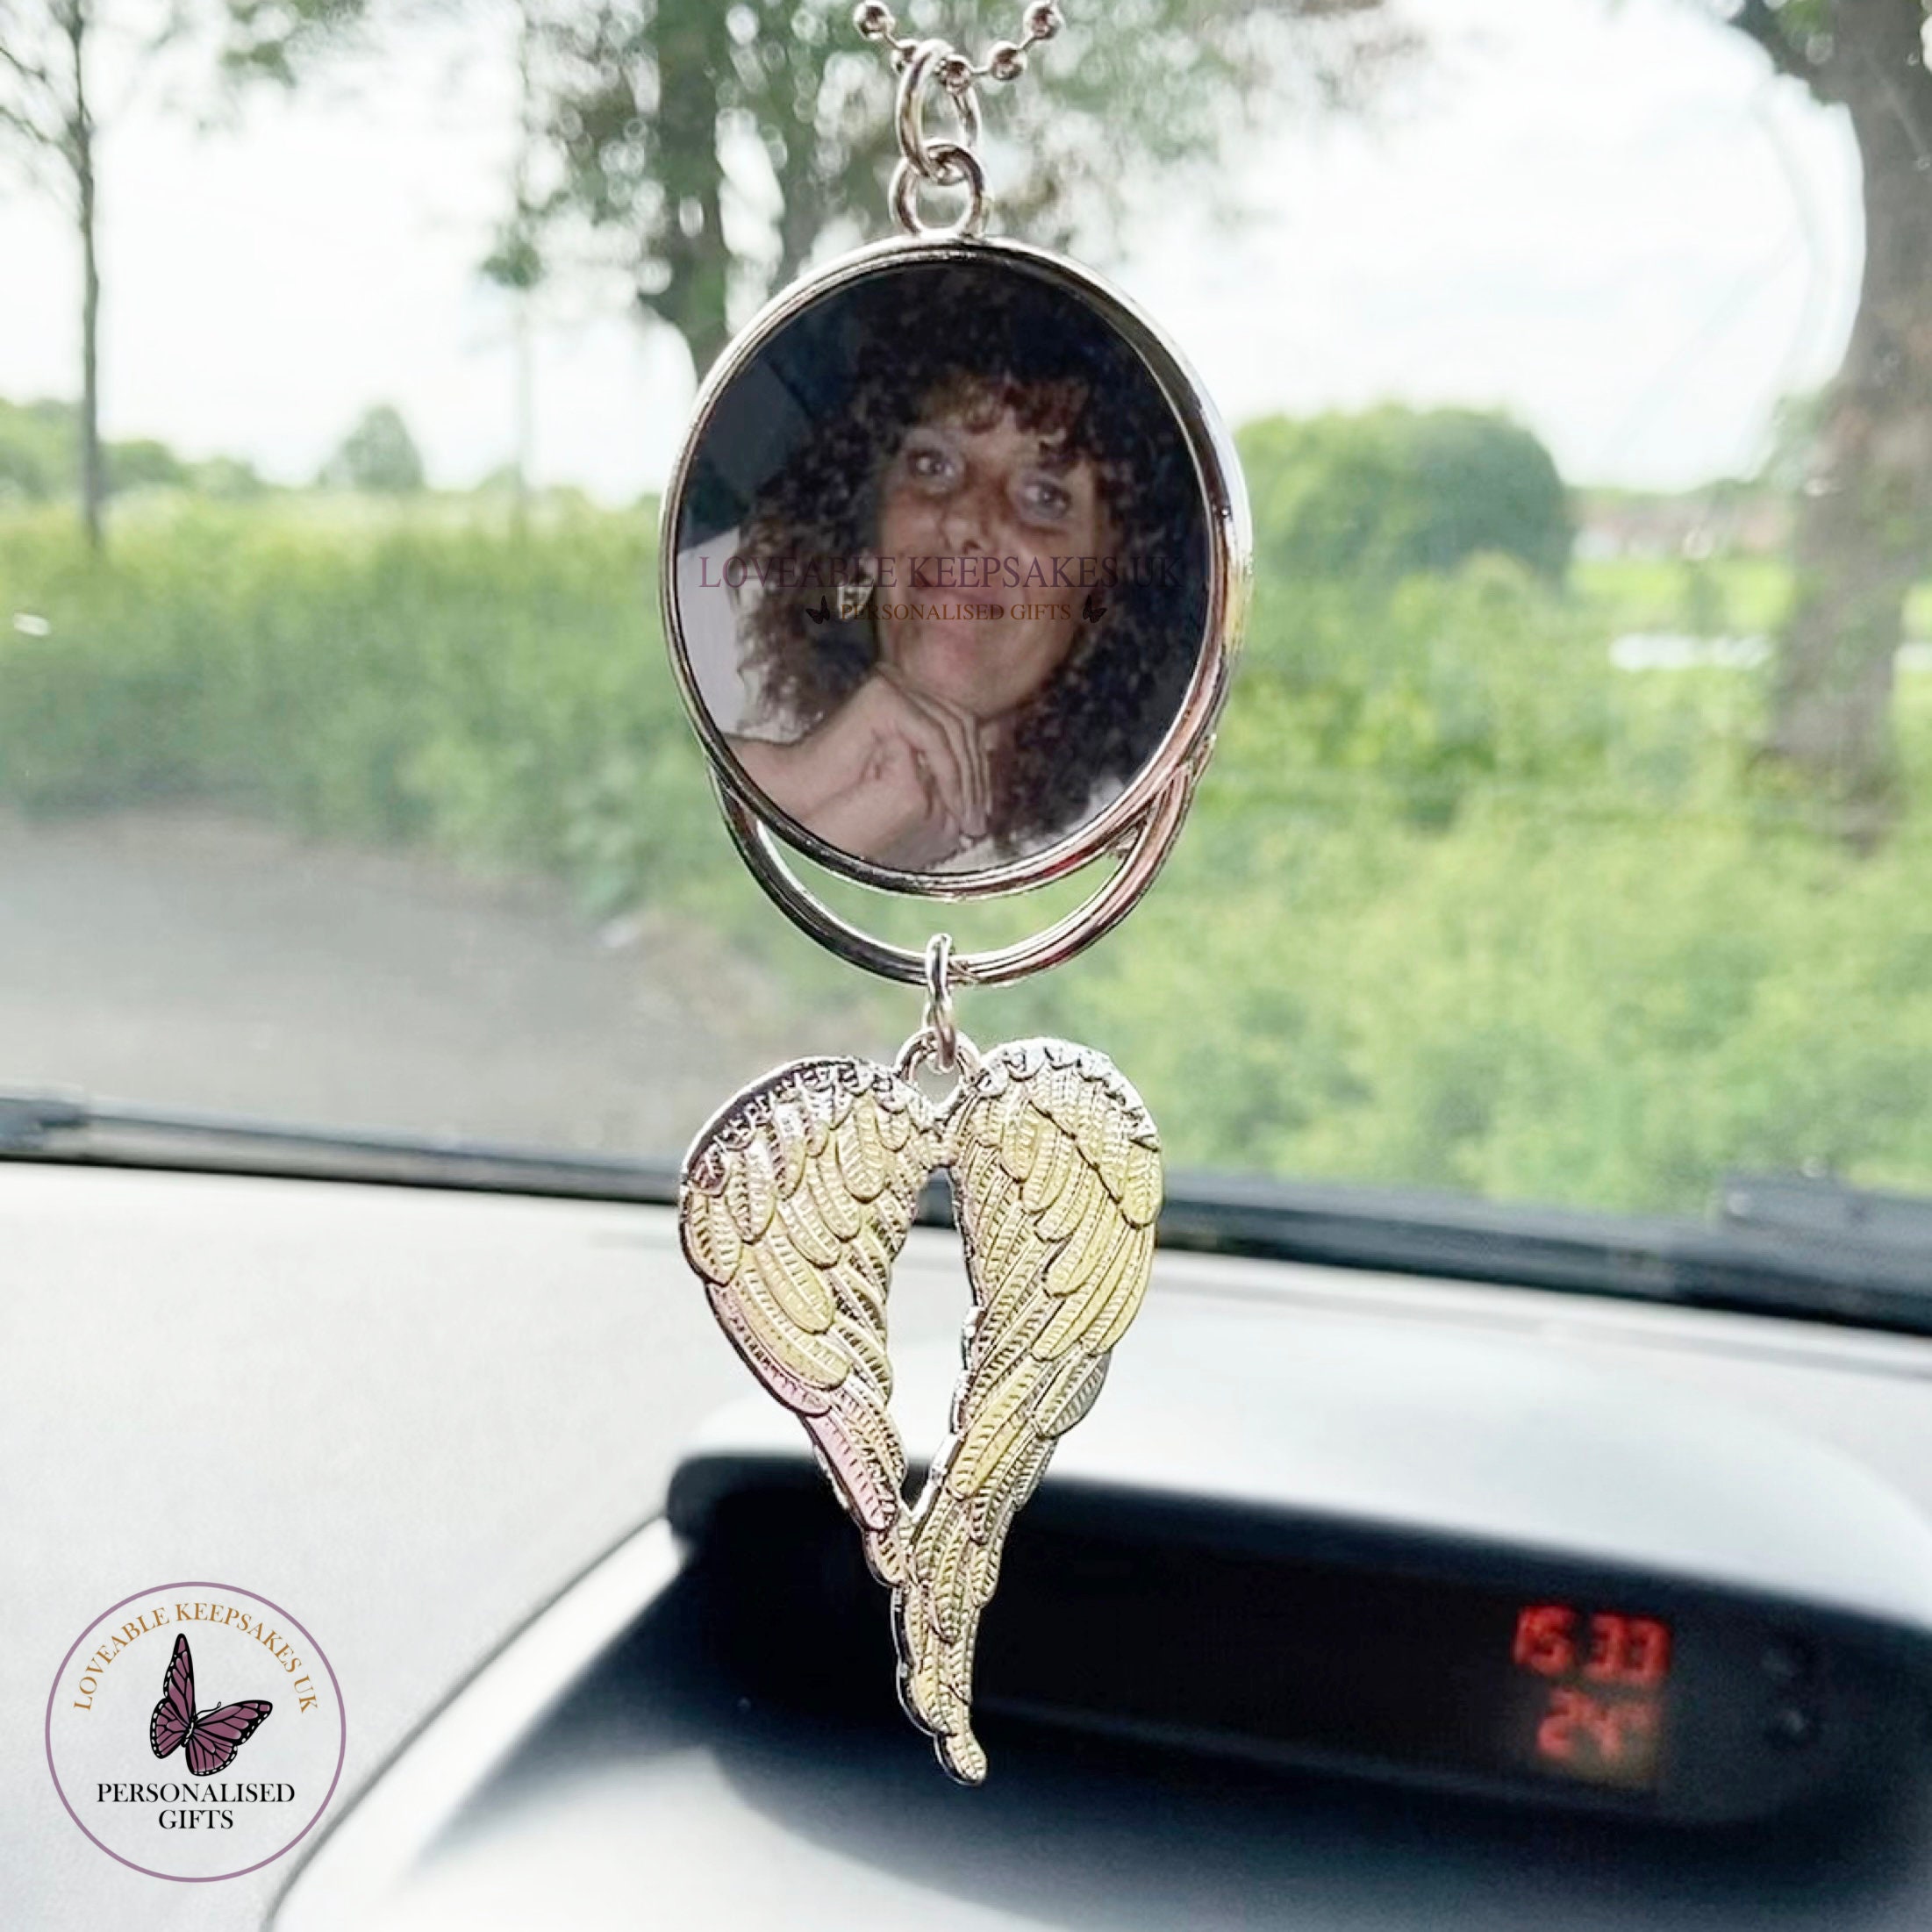 Order His Angels RMH Guardian Angel Cross Car Mirror Accessories Ornaments Car Pendant Home Vehicle Interior Accessories 